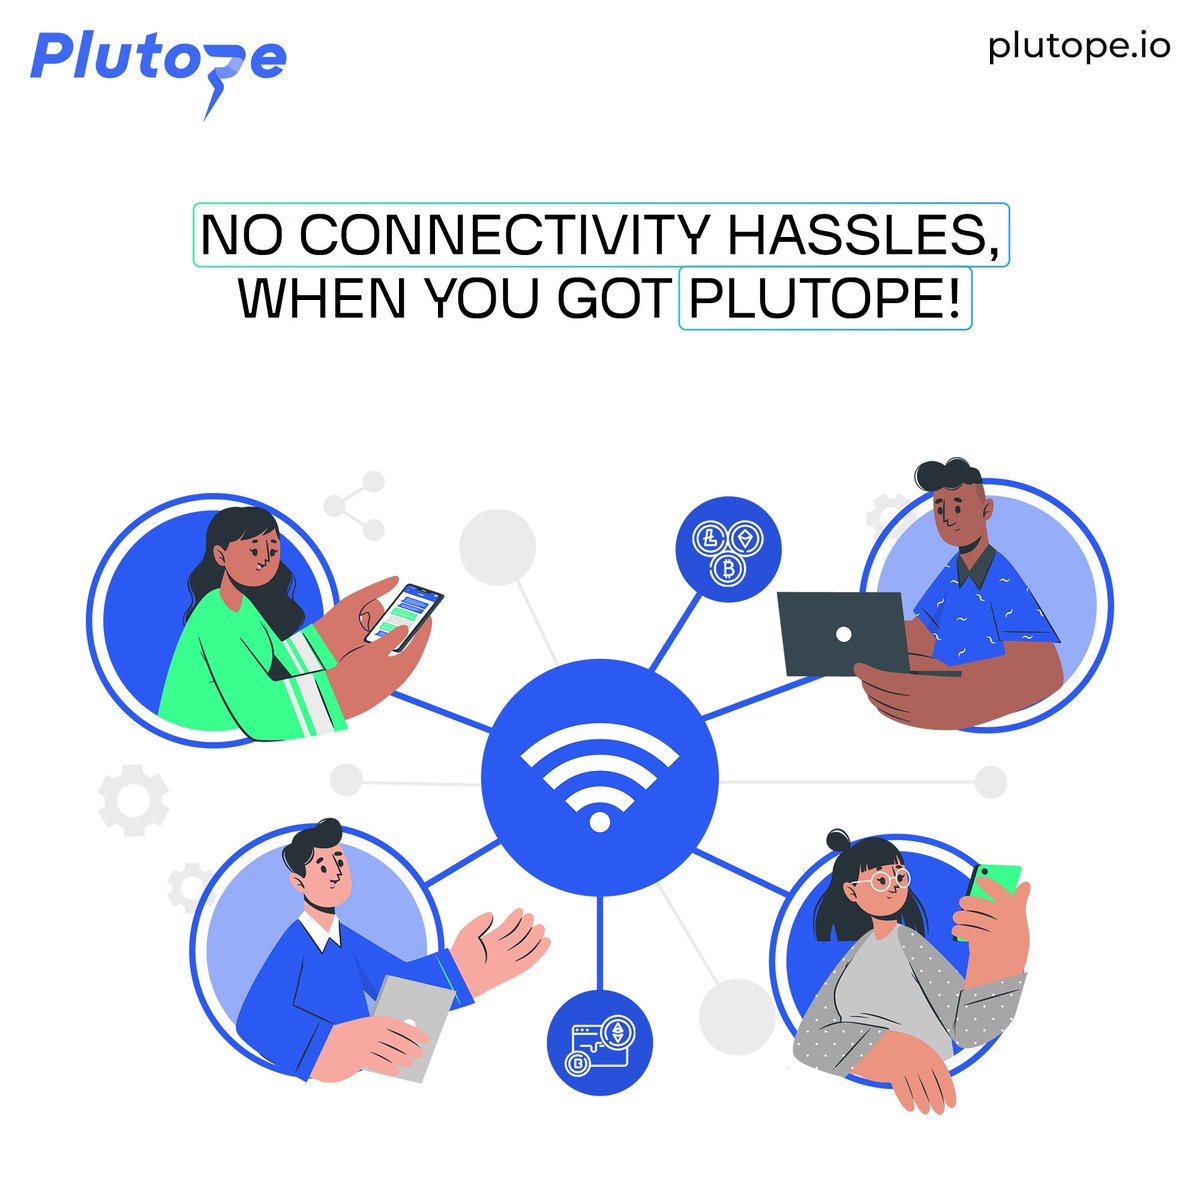 Exploring #cryptowallets? 🤔 

Consider this: 99% of them cannot handle low connectivity😟 

That's where @Plutopeio steps in! 🚀

Whether you're in cities or remote areas, #PlutoPe ensures smooth #transactions even with weak internet. 

Hello, hassle-free crypto, anytime,